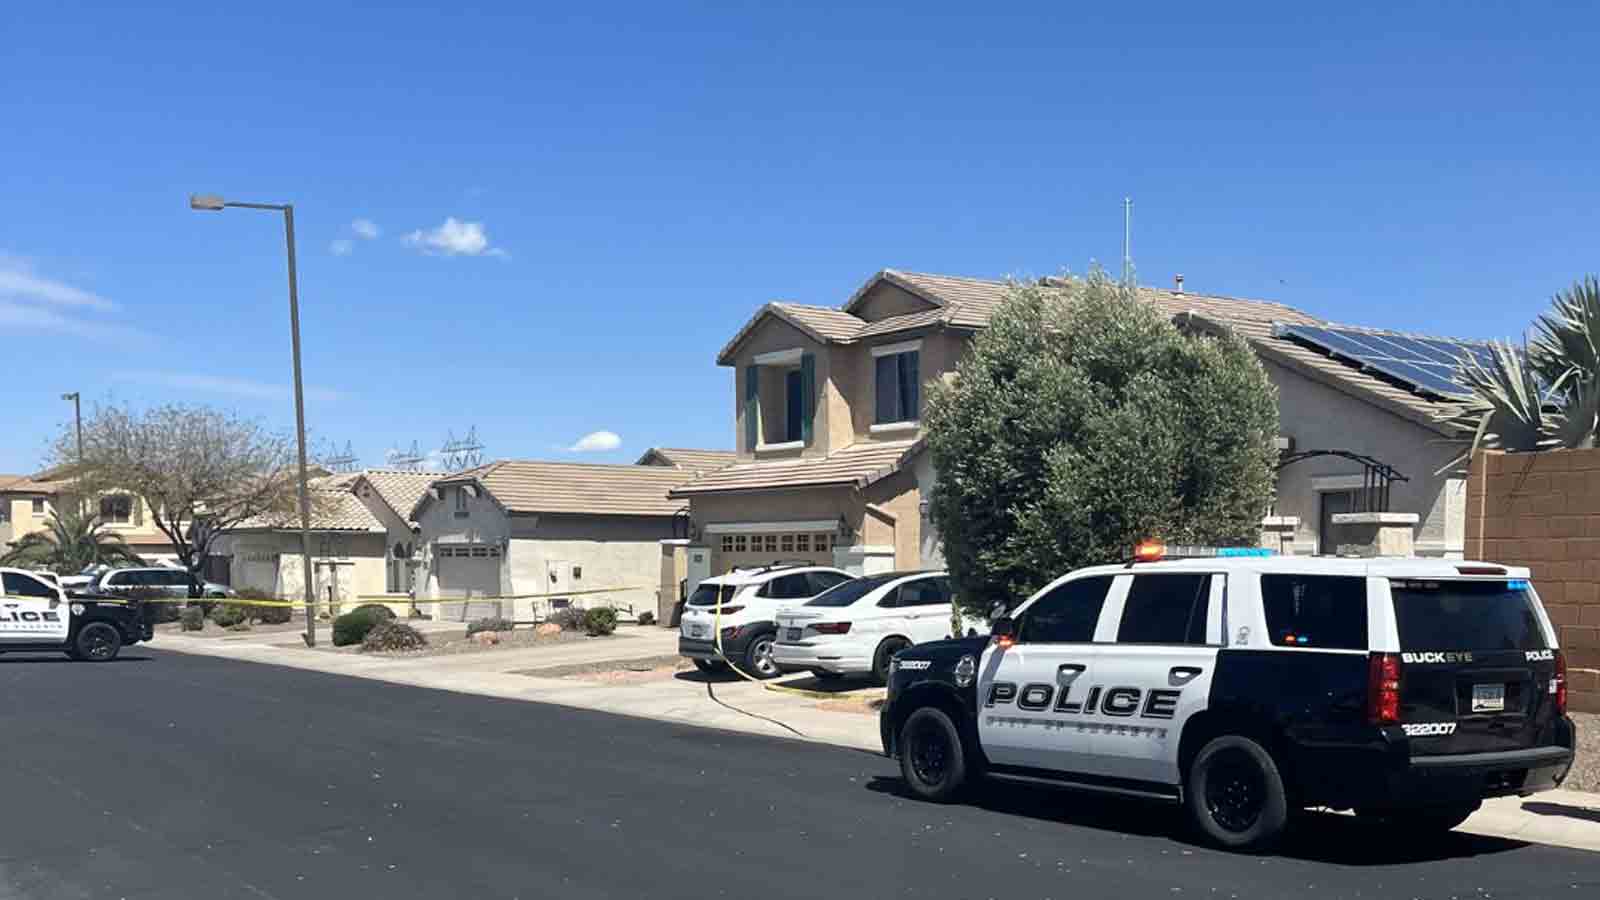 Domestic violence suspect fires weapon at officer in Buckeye before being apprehended